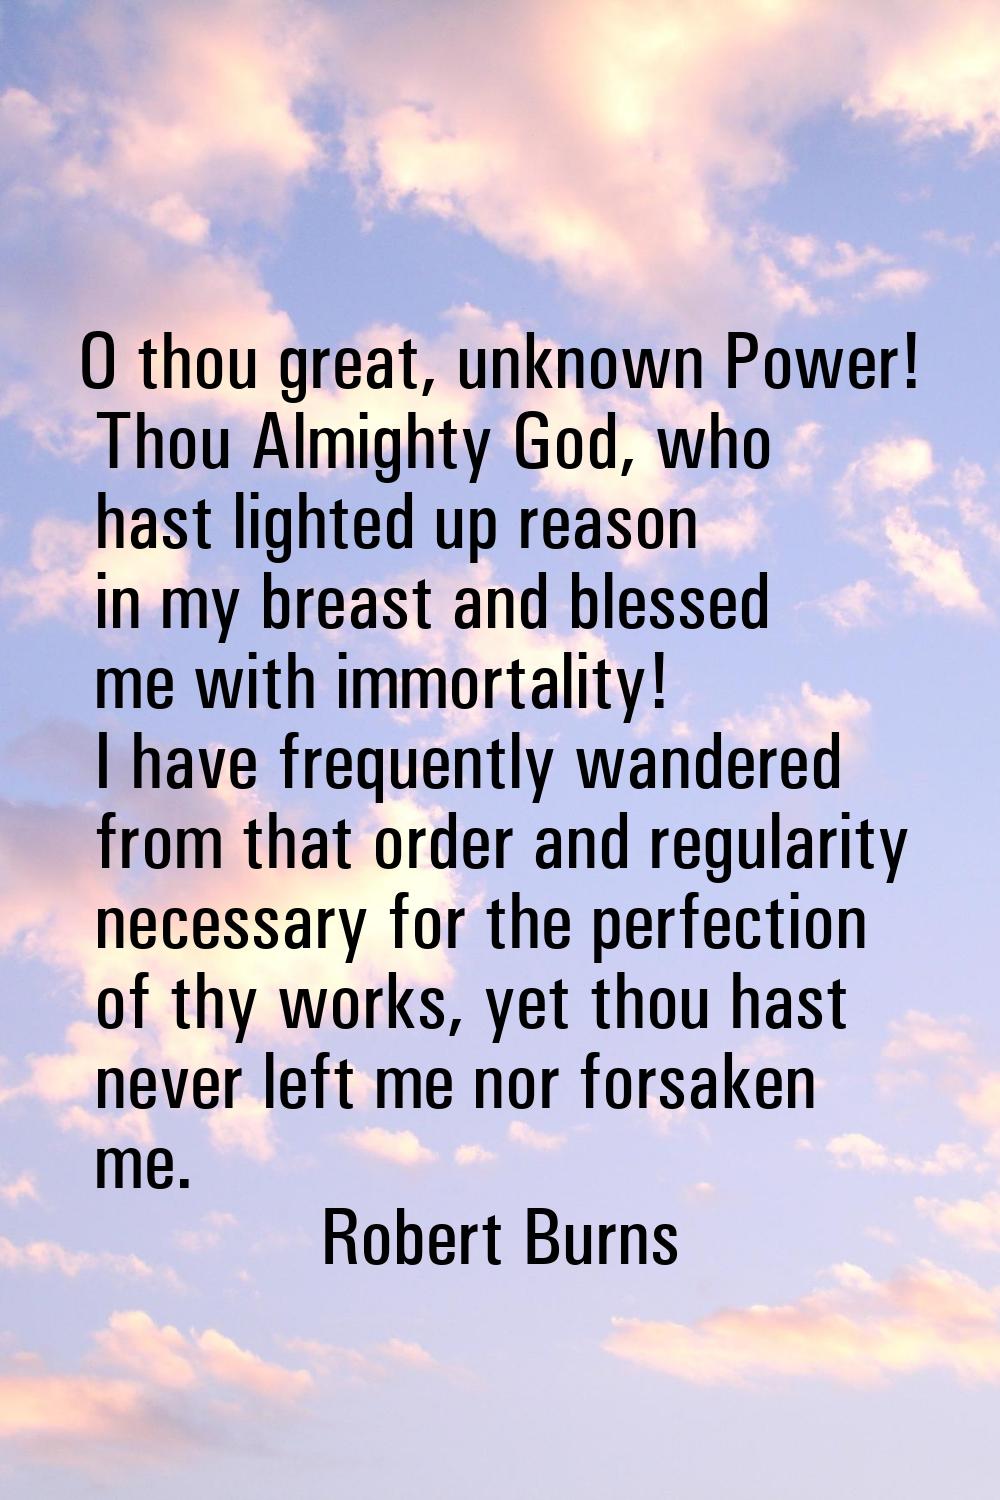 O thou great, unknown Power! Thou Almighty God, who hast lighted up reason in my breast and blessed